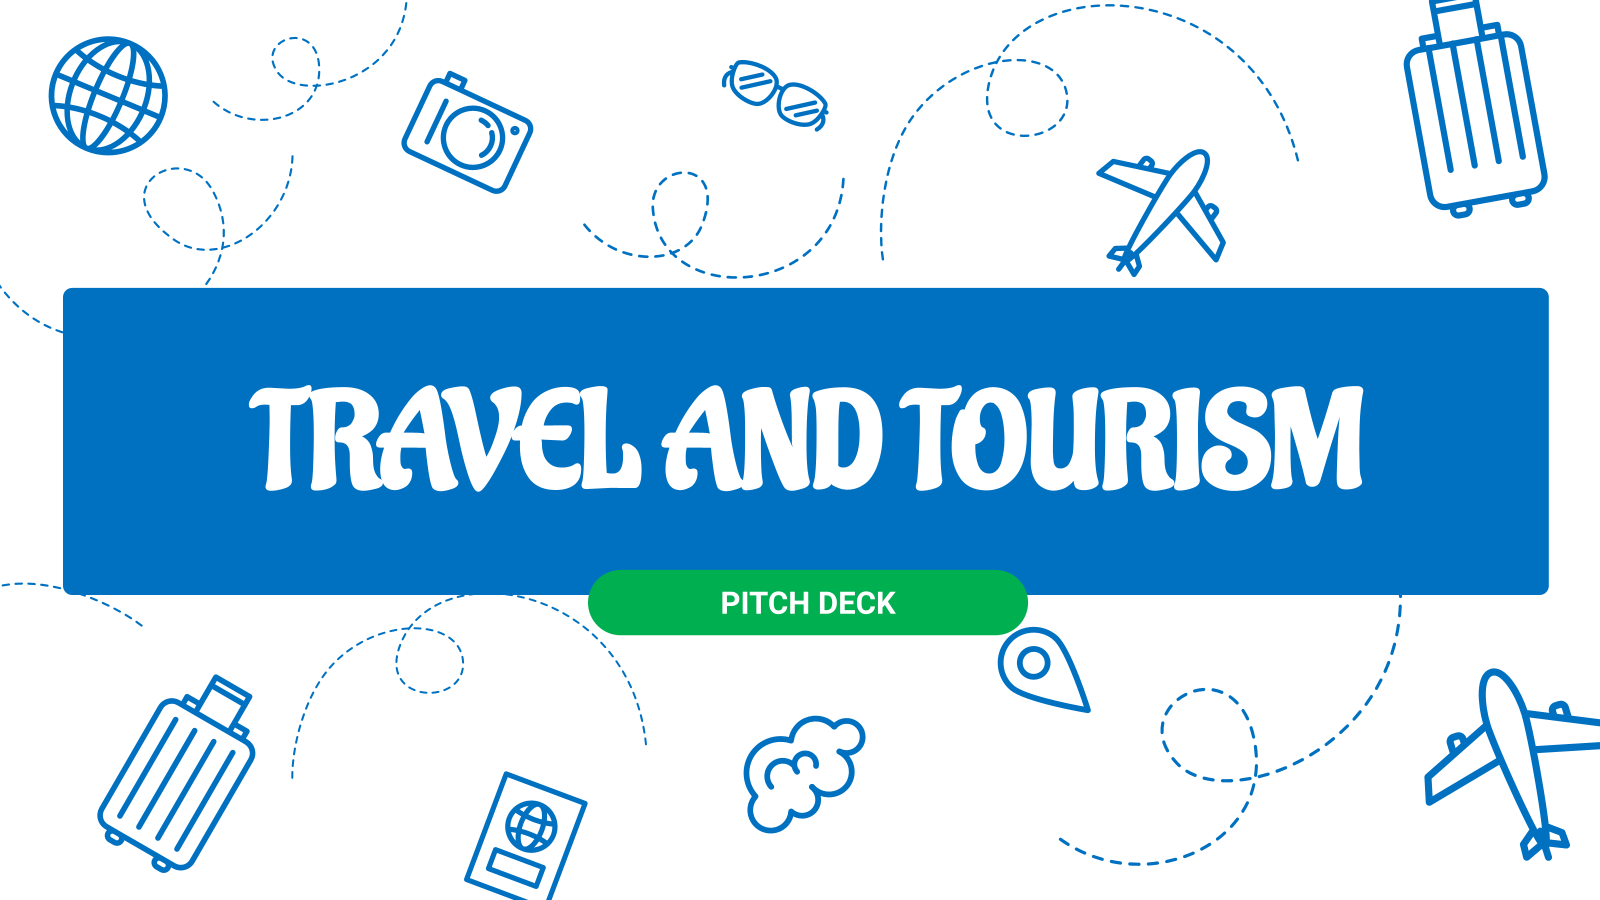 Best Free Travel and Tourism Pitch Deck Template | Slide Templates ...